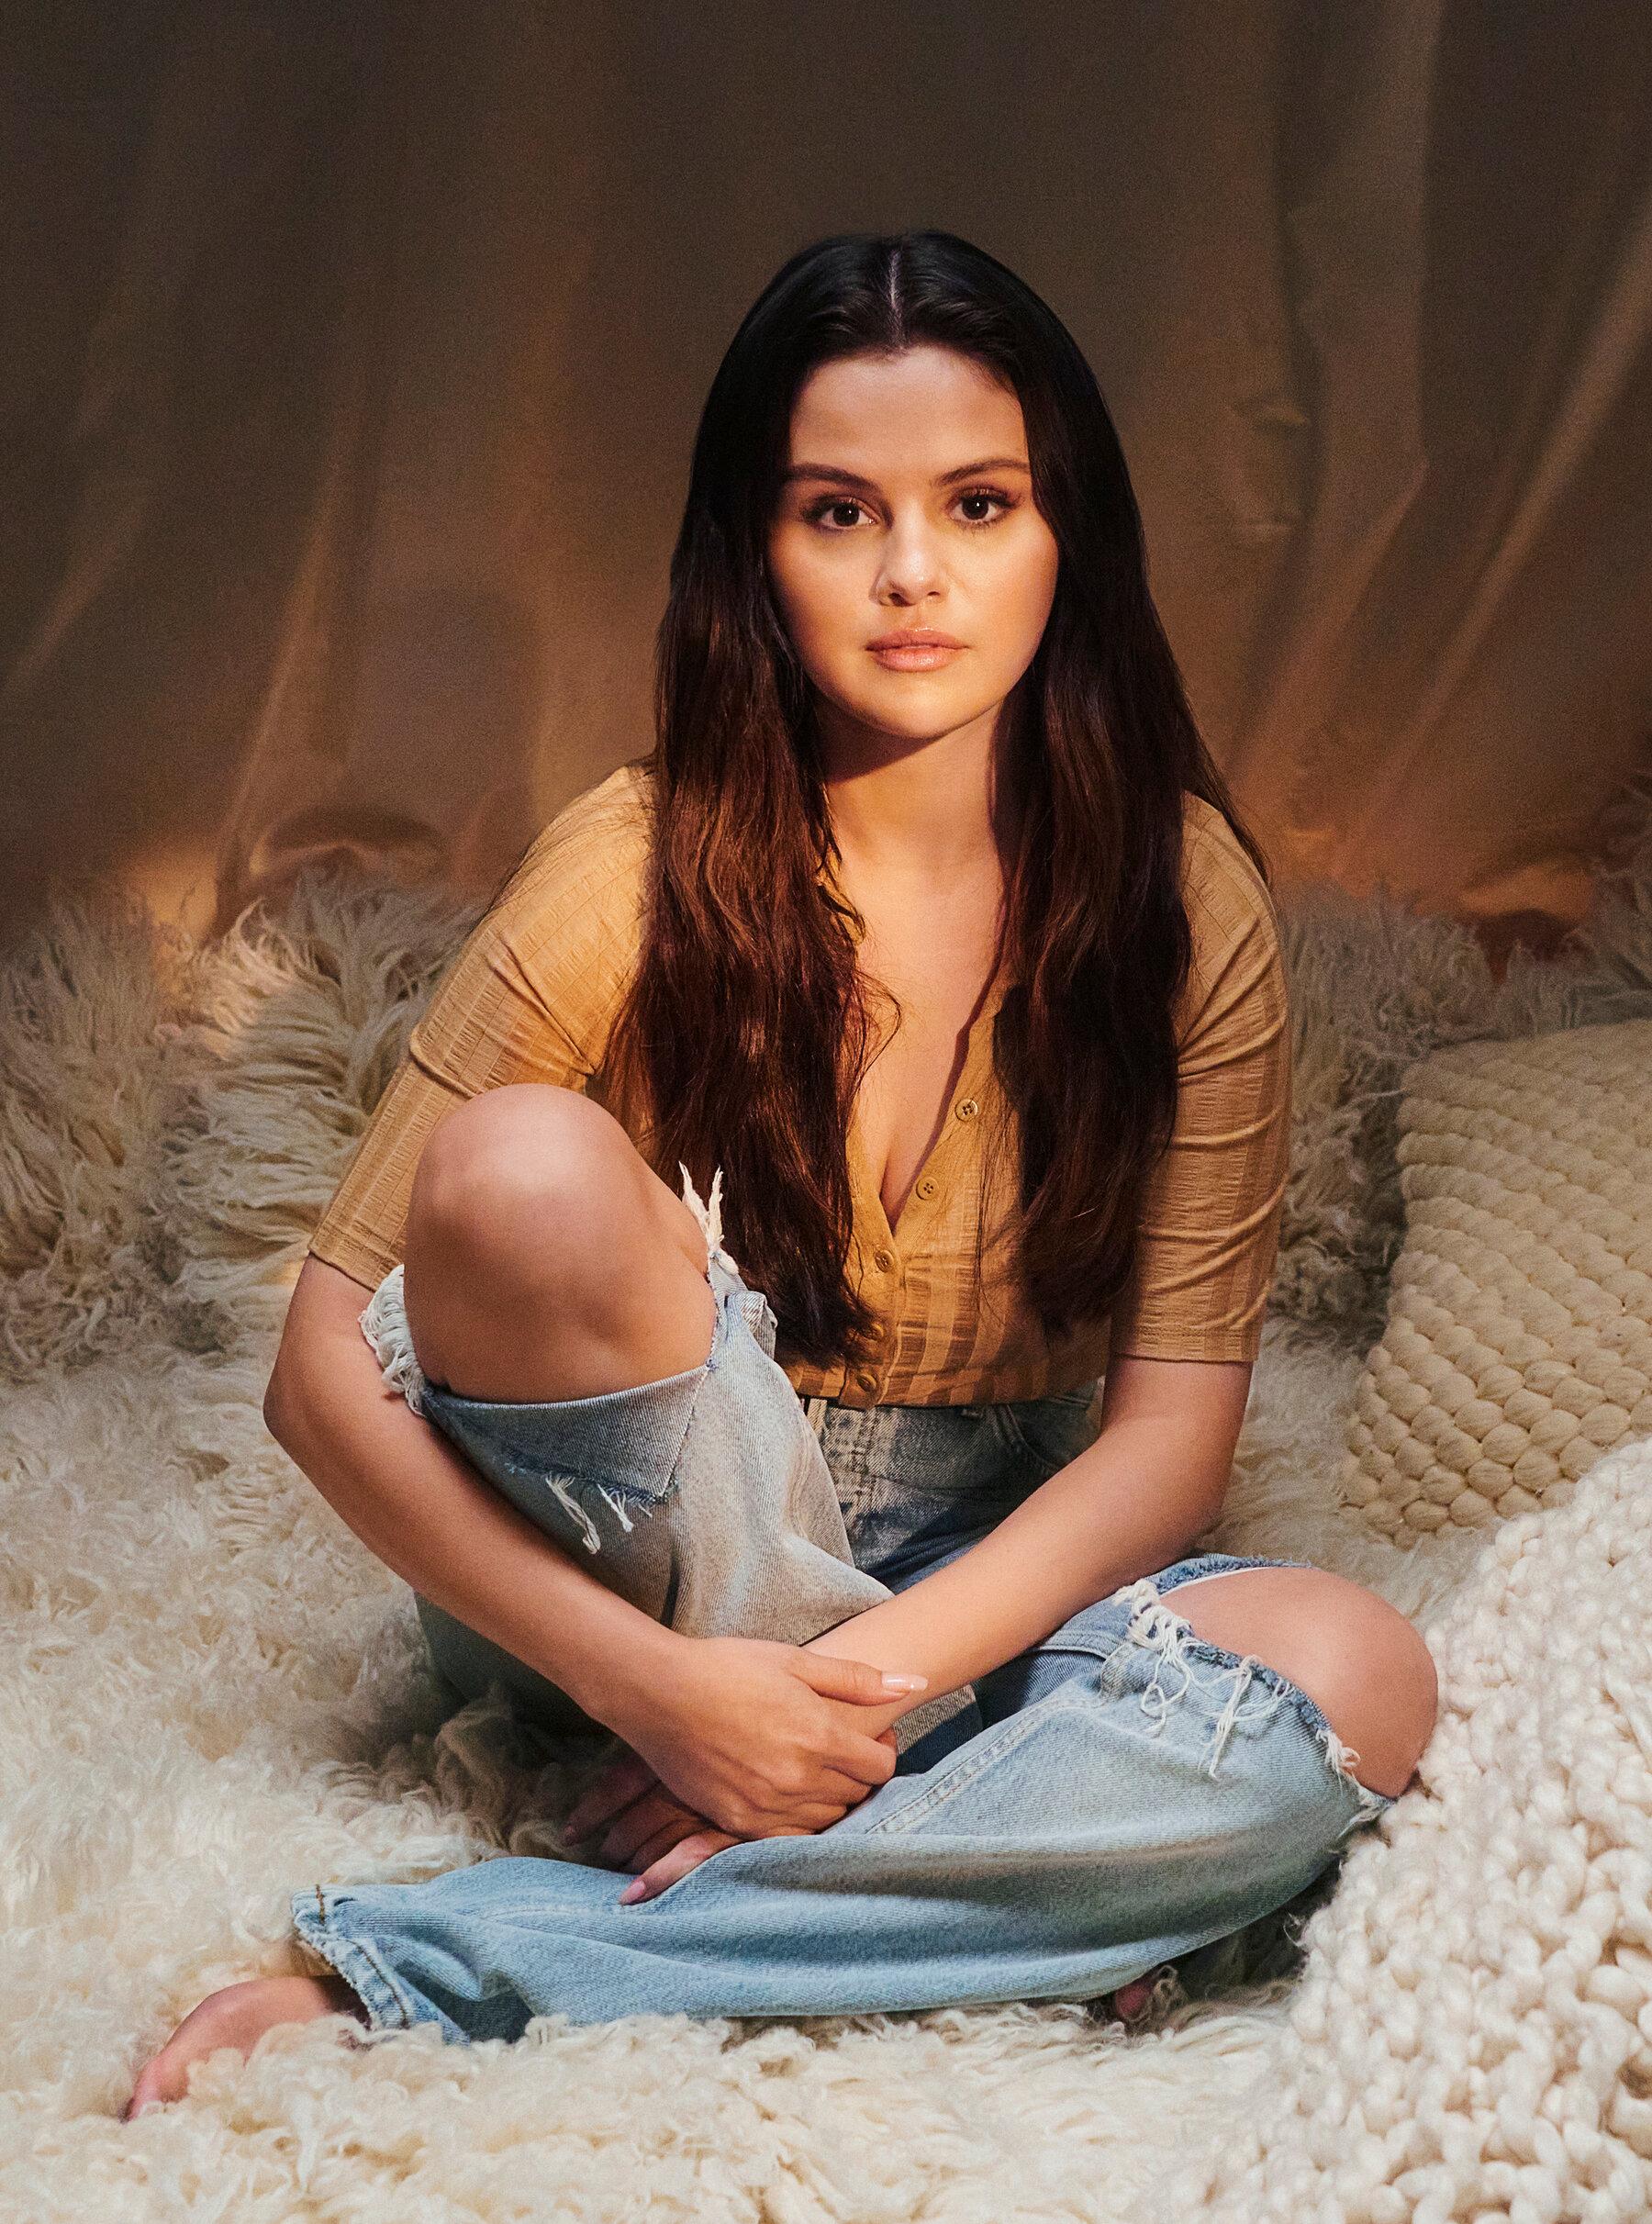 Selena Gomez S Boldly Revealing Ballad And More New Songs The